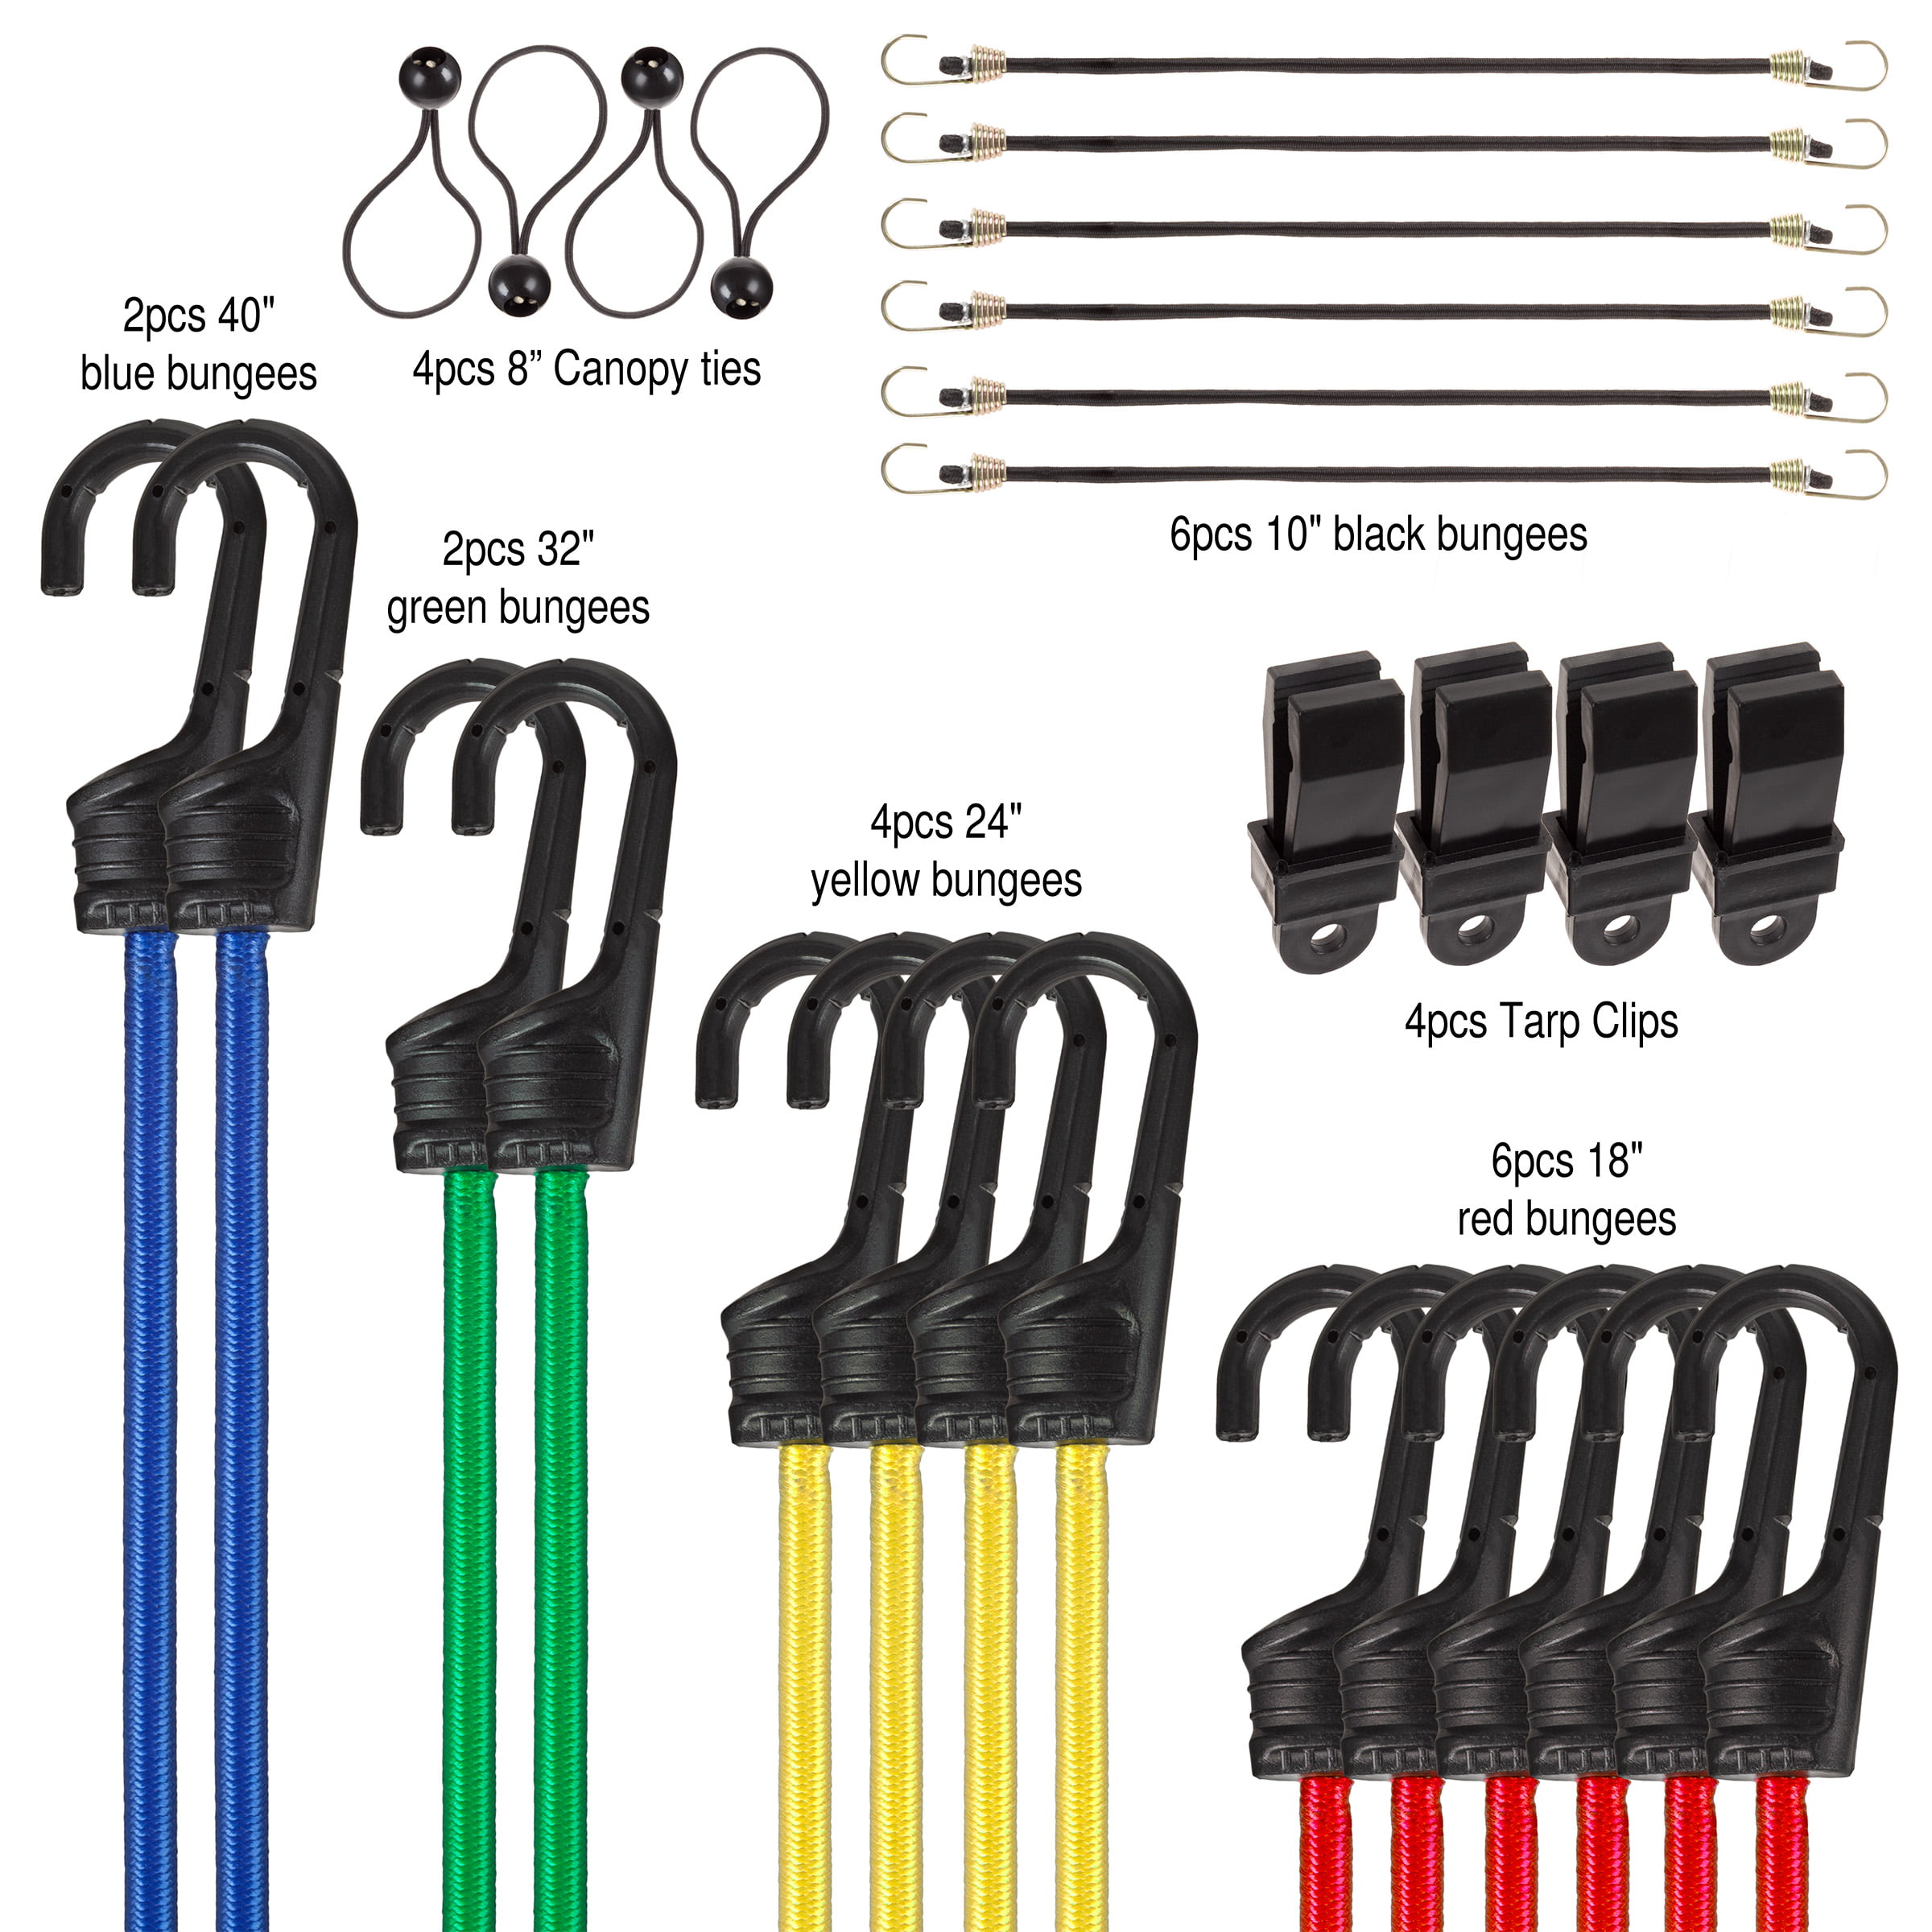 16 Piece Bungee Cord Set- Assortment of 4 Sizes- 18”, 24” 32” 40” with  Storage Bag-Tie Downs with Hooks for Trucks, Trailers, ATVs & More by  Stalwart 